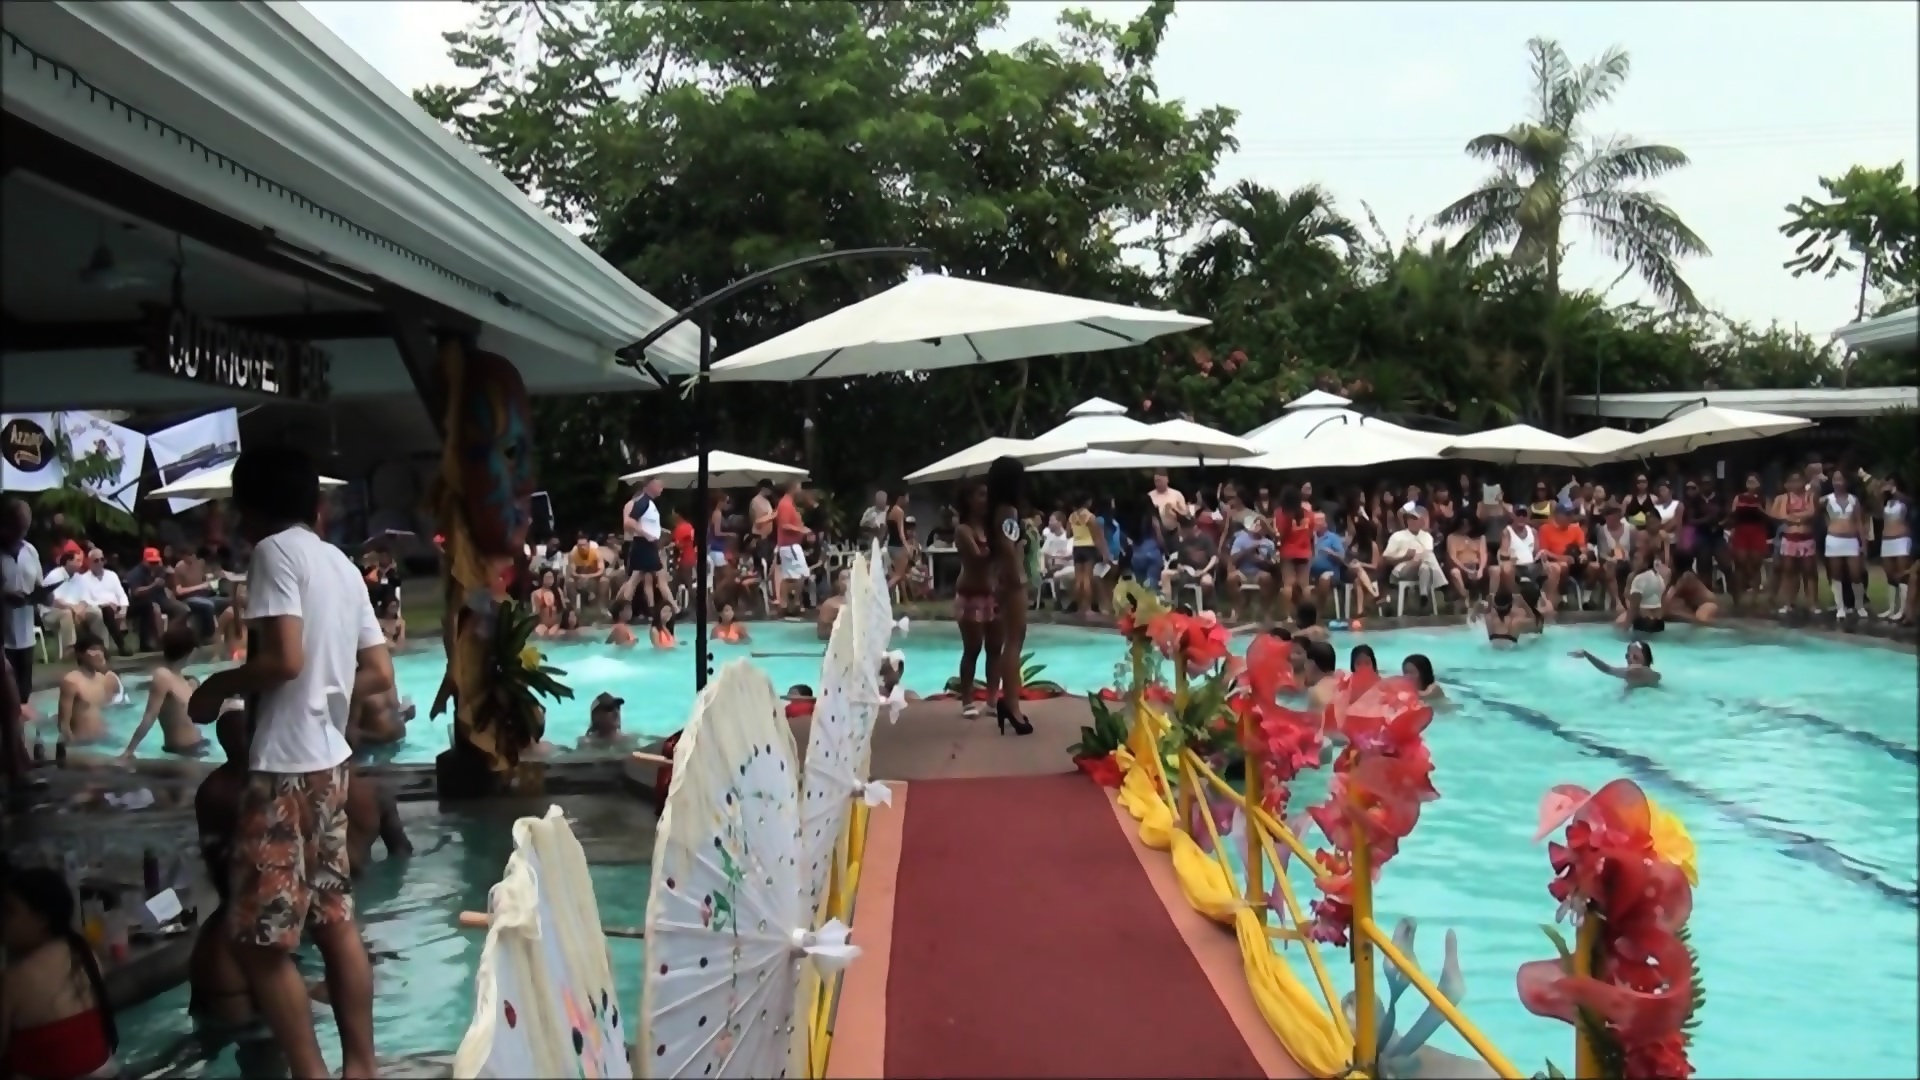 Orchids Hotel Pool Party Angeles City Philippines Eporner